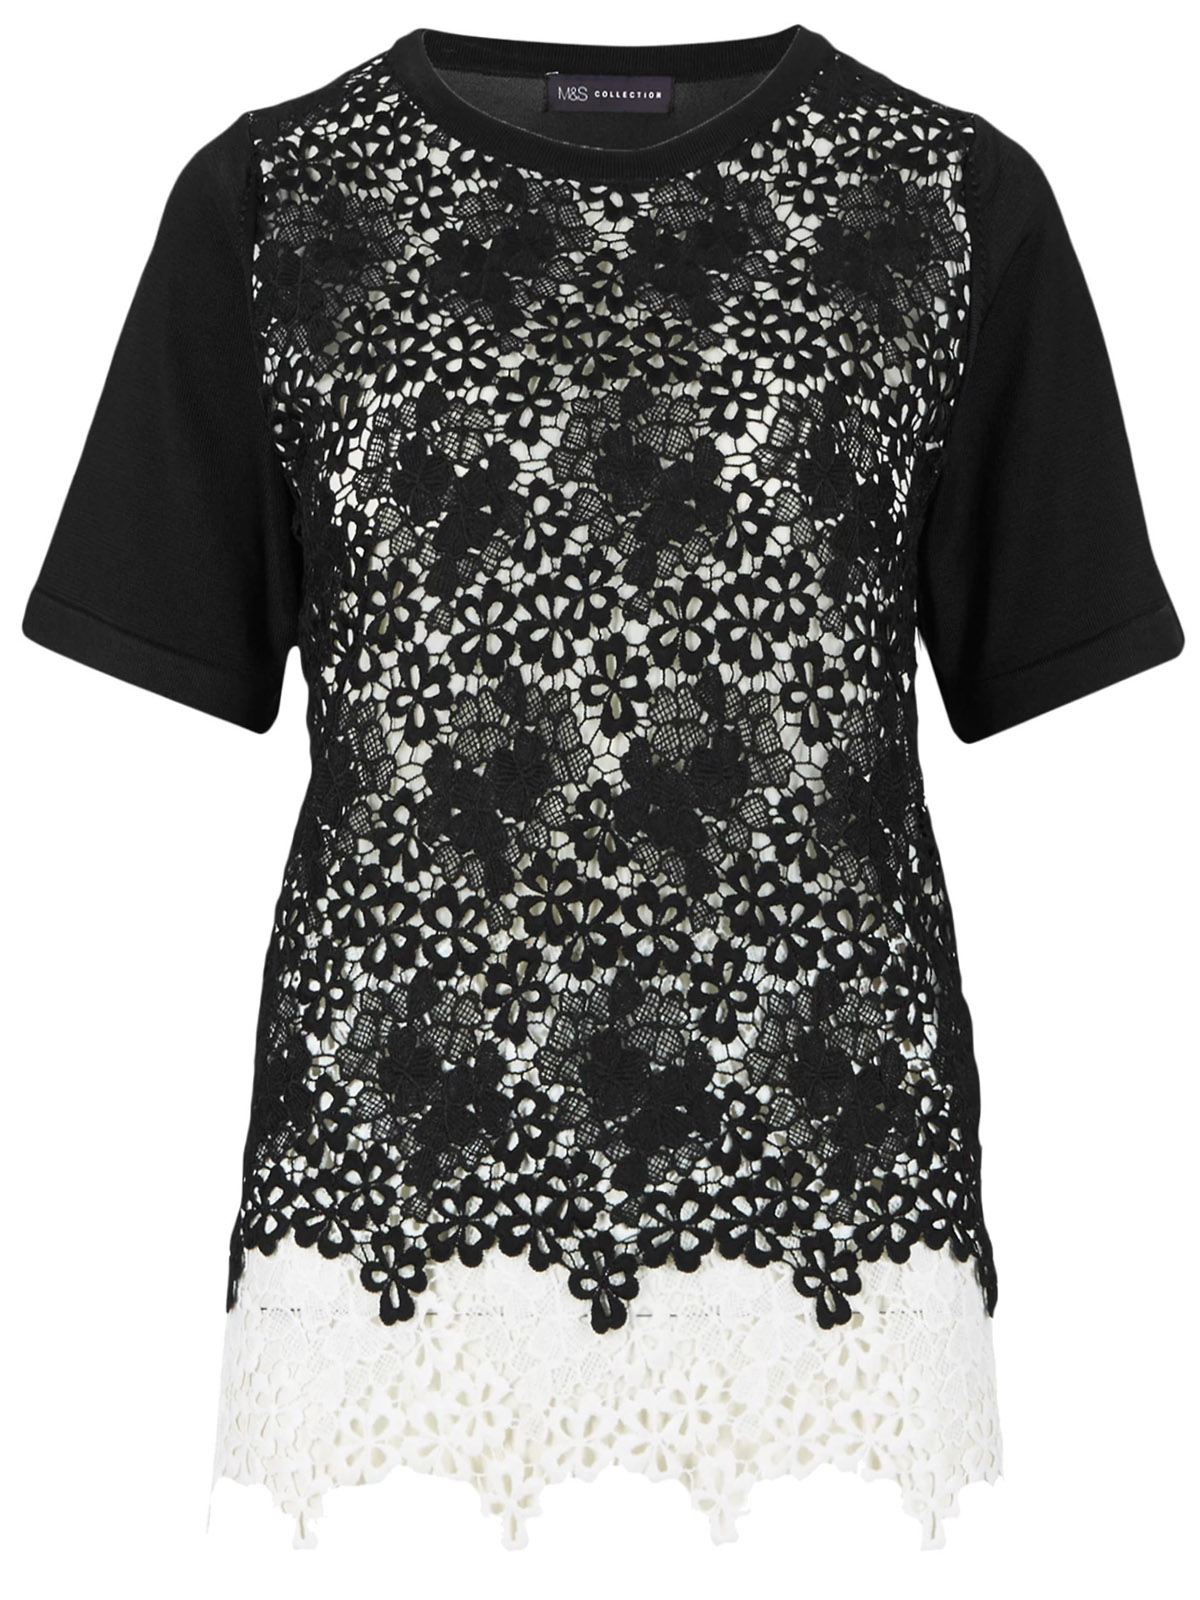 Marks and Spencer - - M&5 BLACK Short Sleeve Lace Jumper - Plus SIze 16